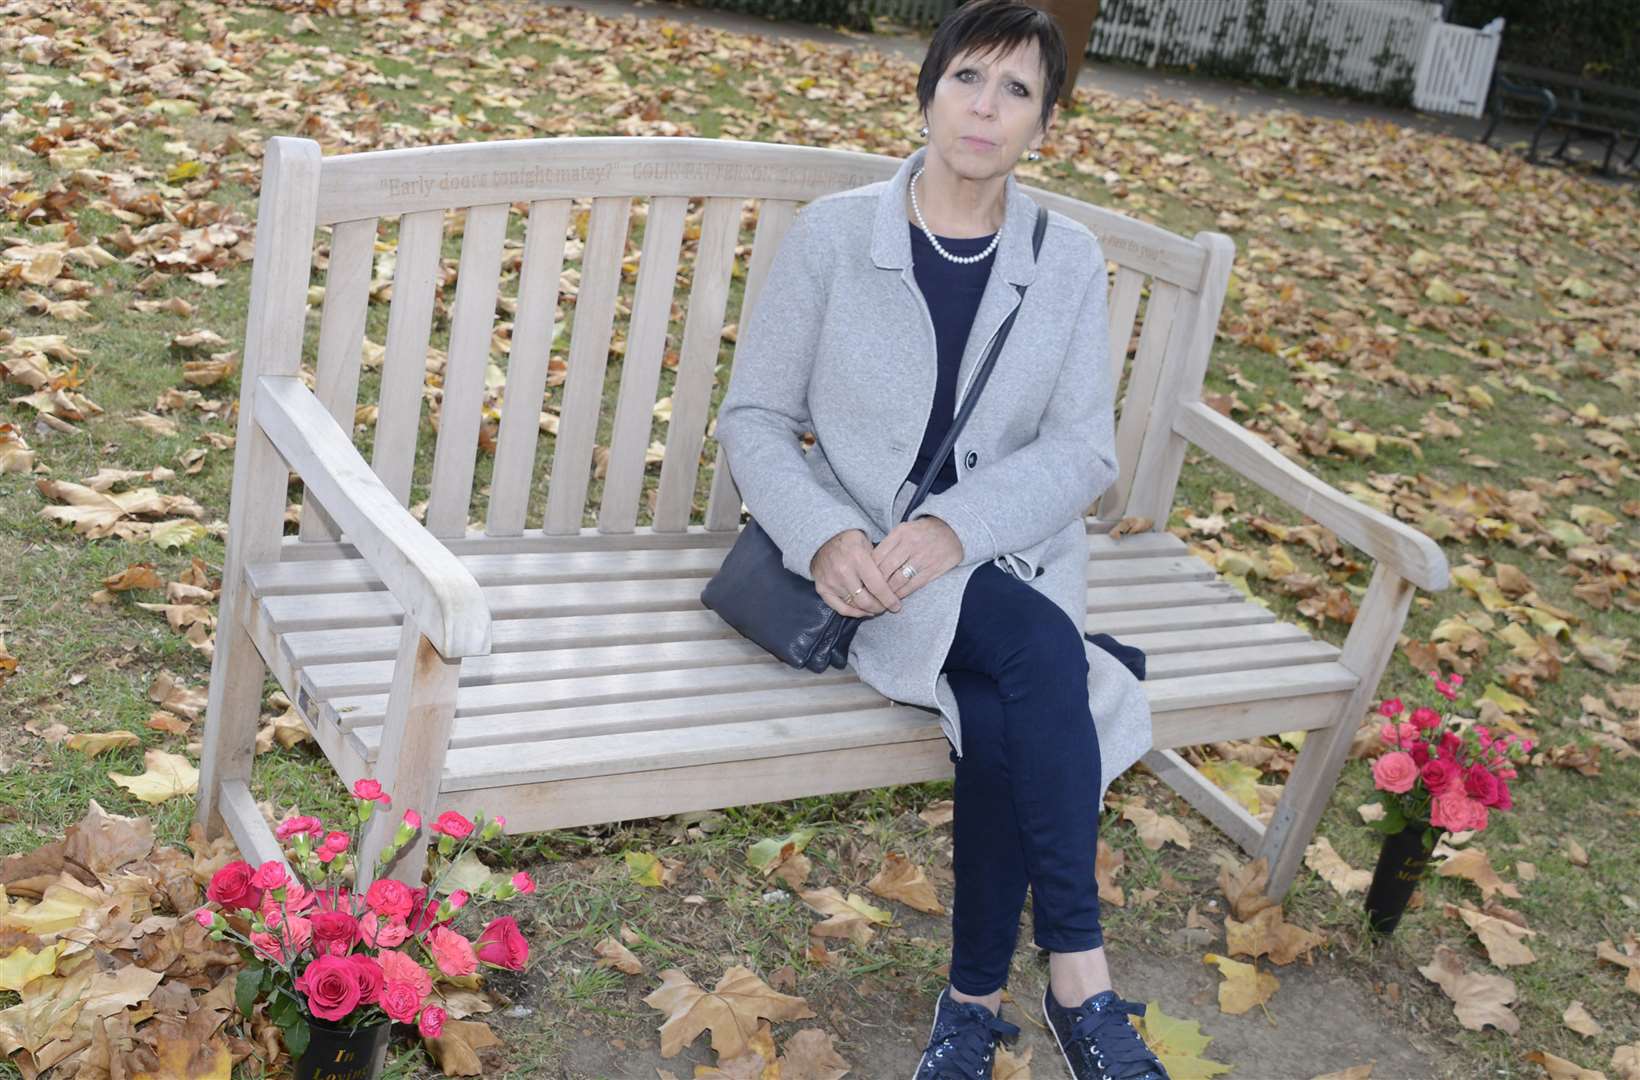 Christine Patterson at the memorial bench to her husband